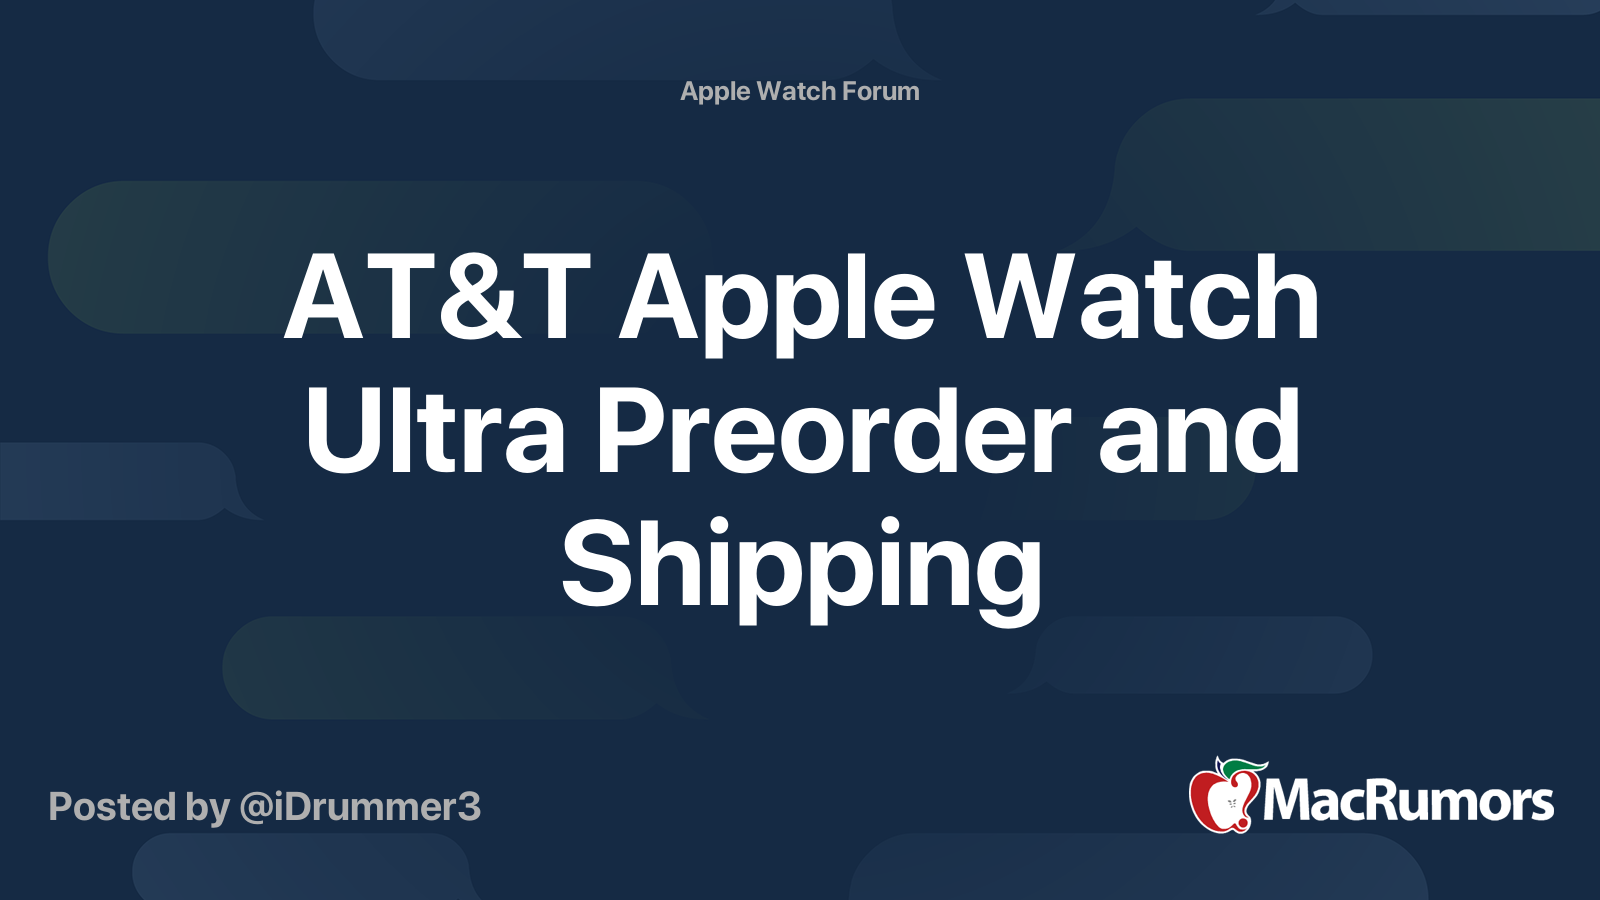 AT&T Apple Watch Ultra Preorder and Shipping